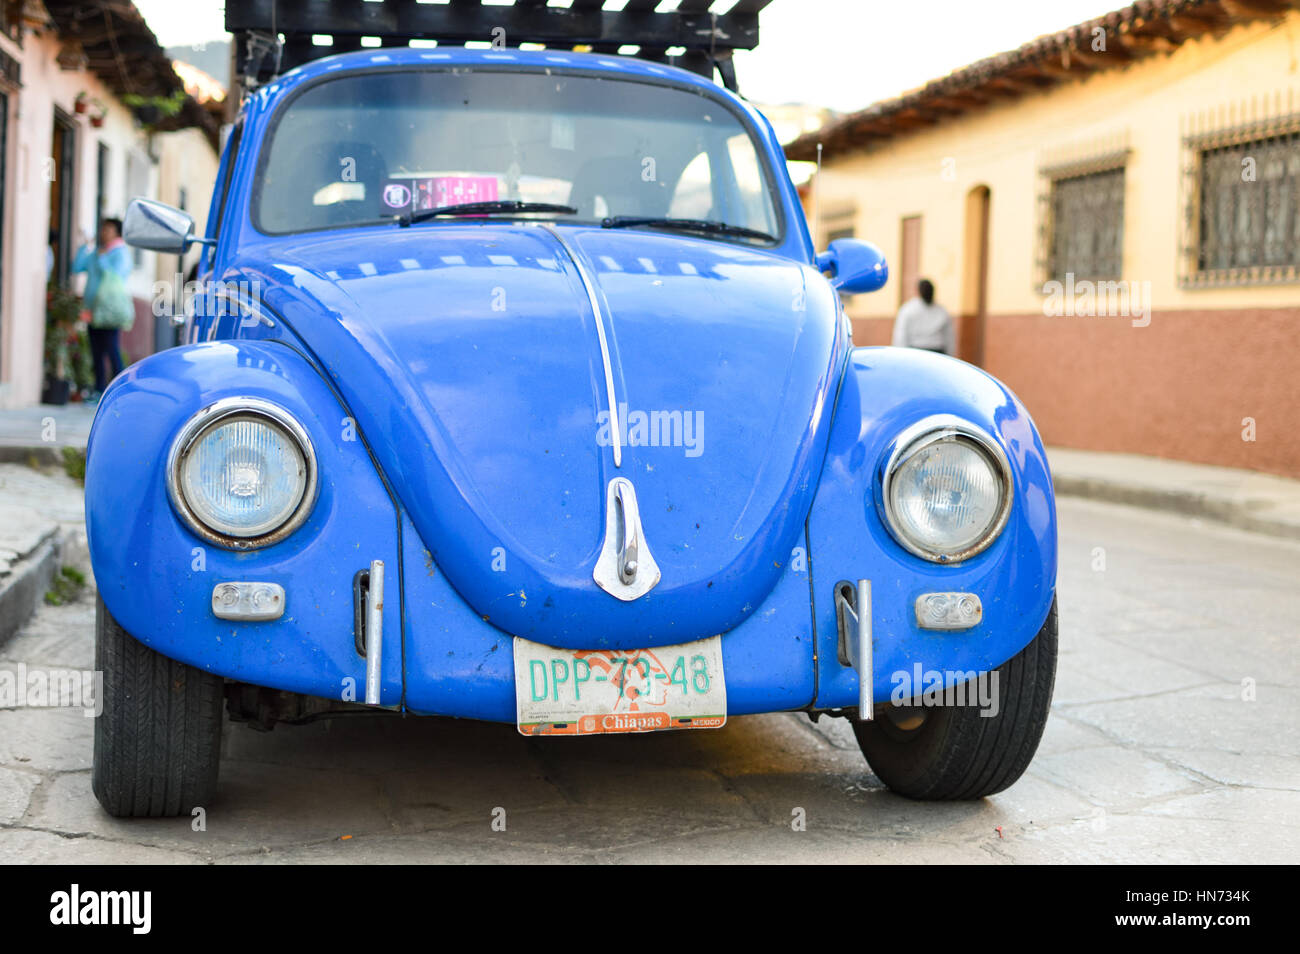 San Cristobal De Las Casas, Mexico - December 4, 2014: Old blue car is parked in the streets of the colonial town of San Cristobal De Las Casas on Dec Stock Photo